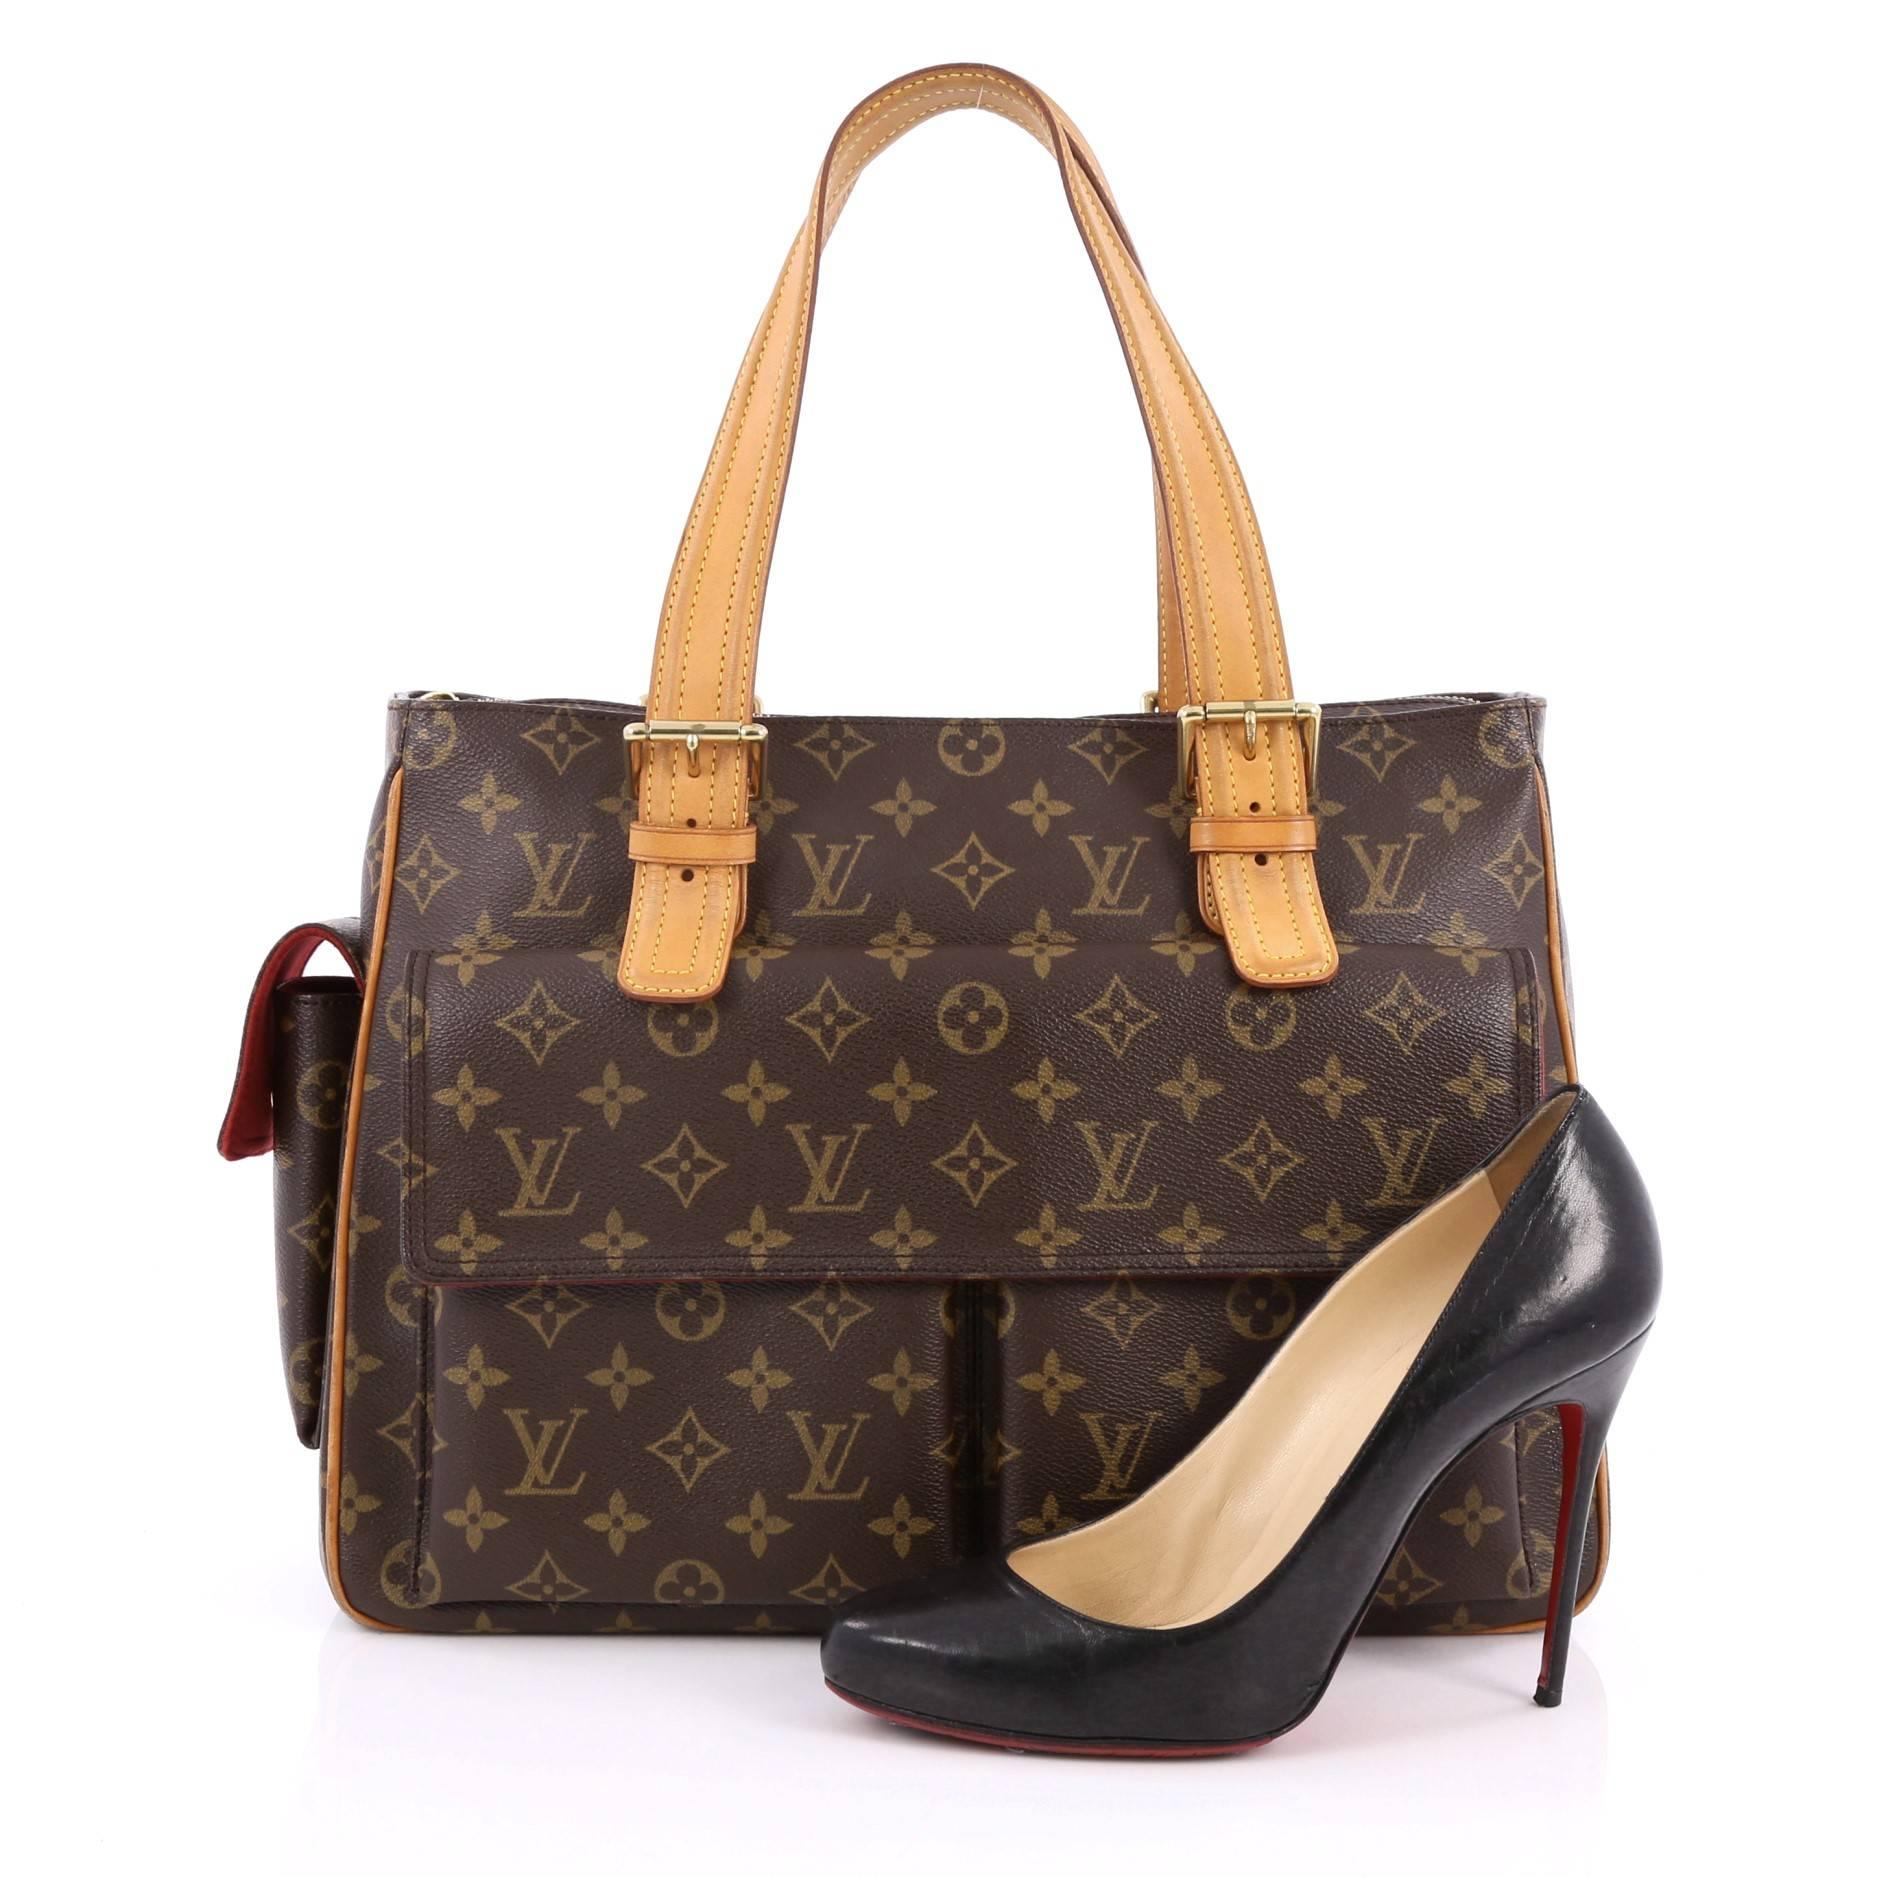 This authentic Louis Vuitton Multipli Cite Handbag Monogram Canvas showcases a simple design made for everyday use. Crafted from Louis Vuitton's iconic brown monogram coated canvas, this tote features dual adjustable vachetta leather straps,